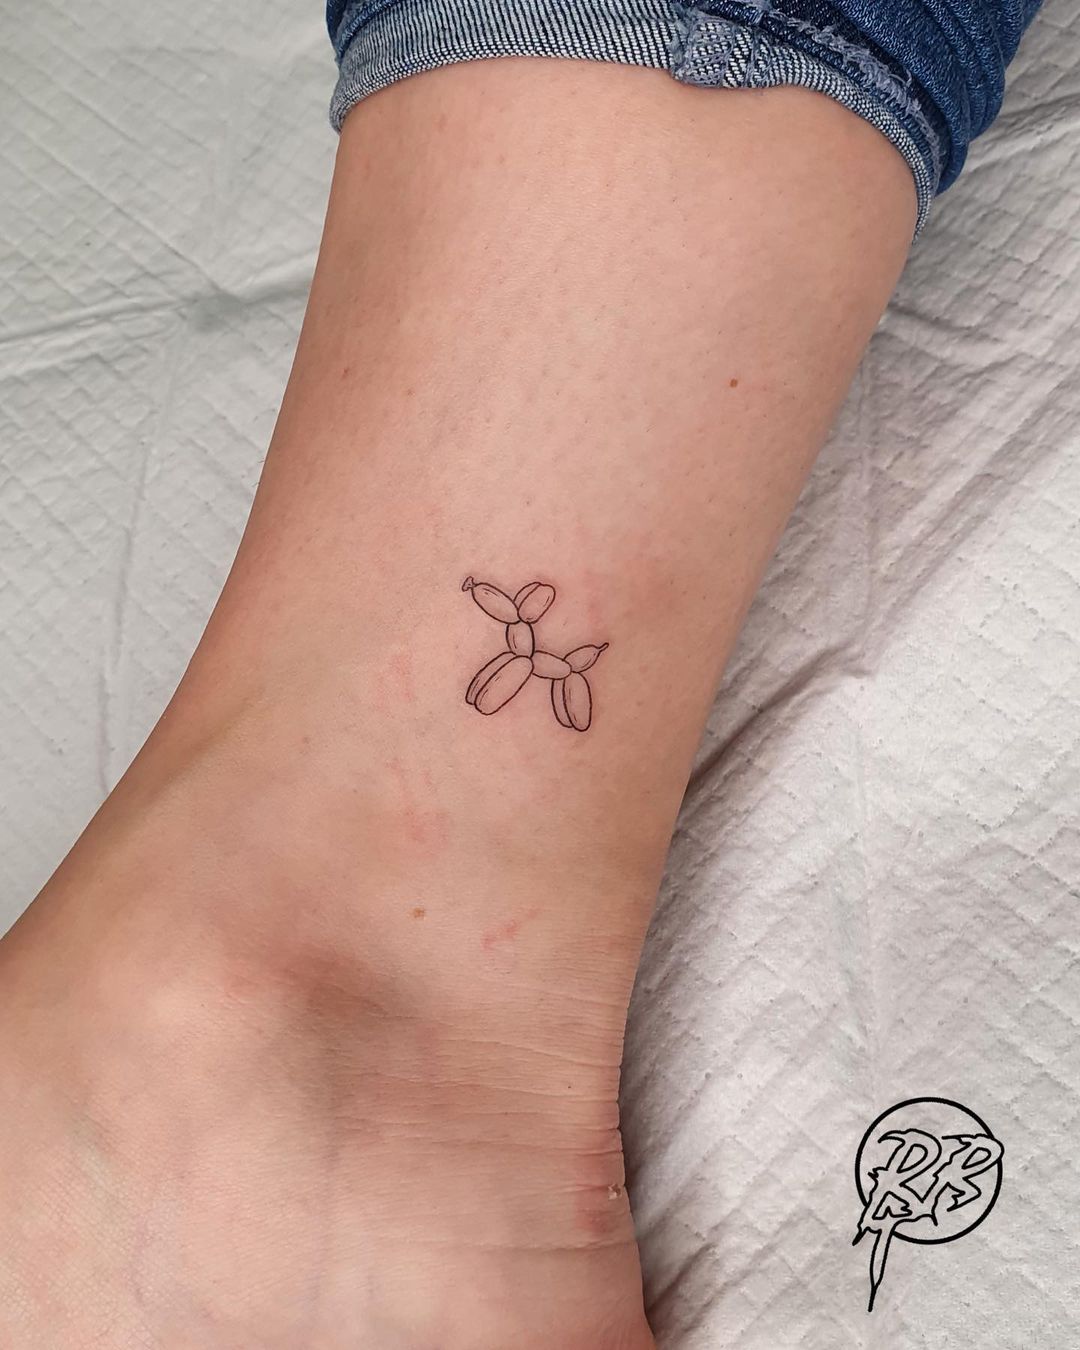 Update 90+ about funny small tattoos best - in.daotaonec